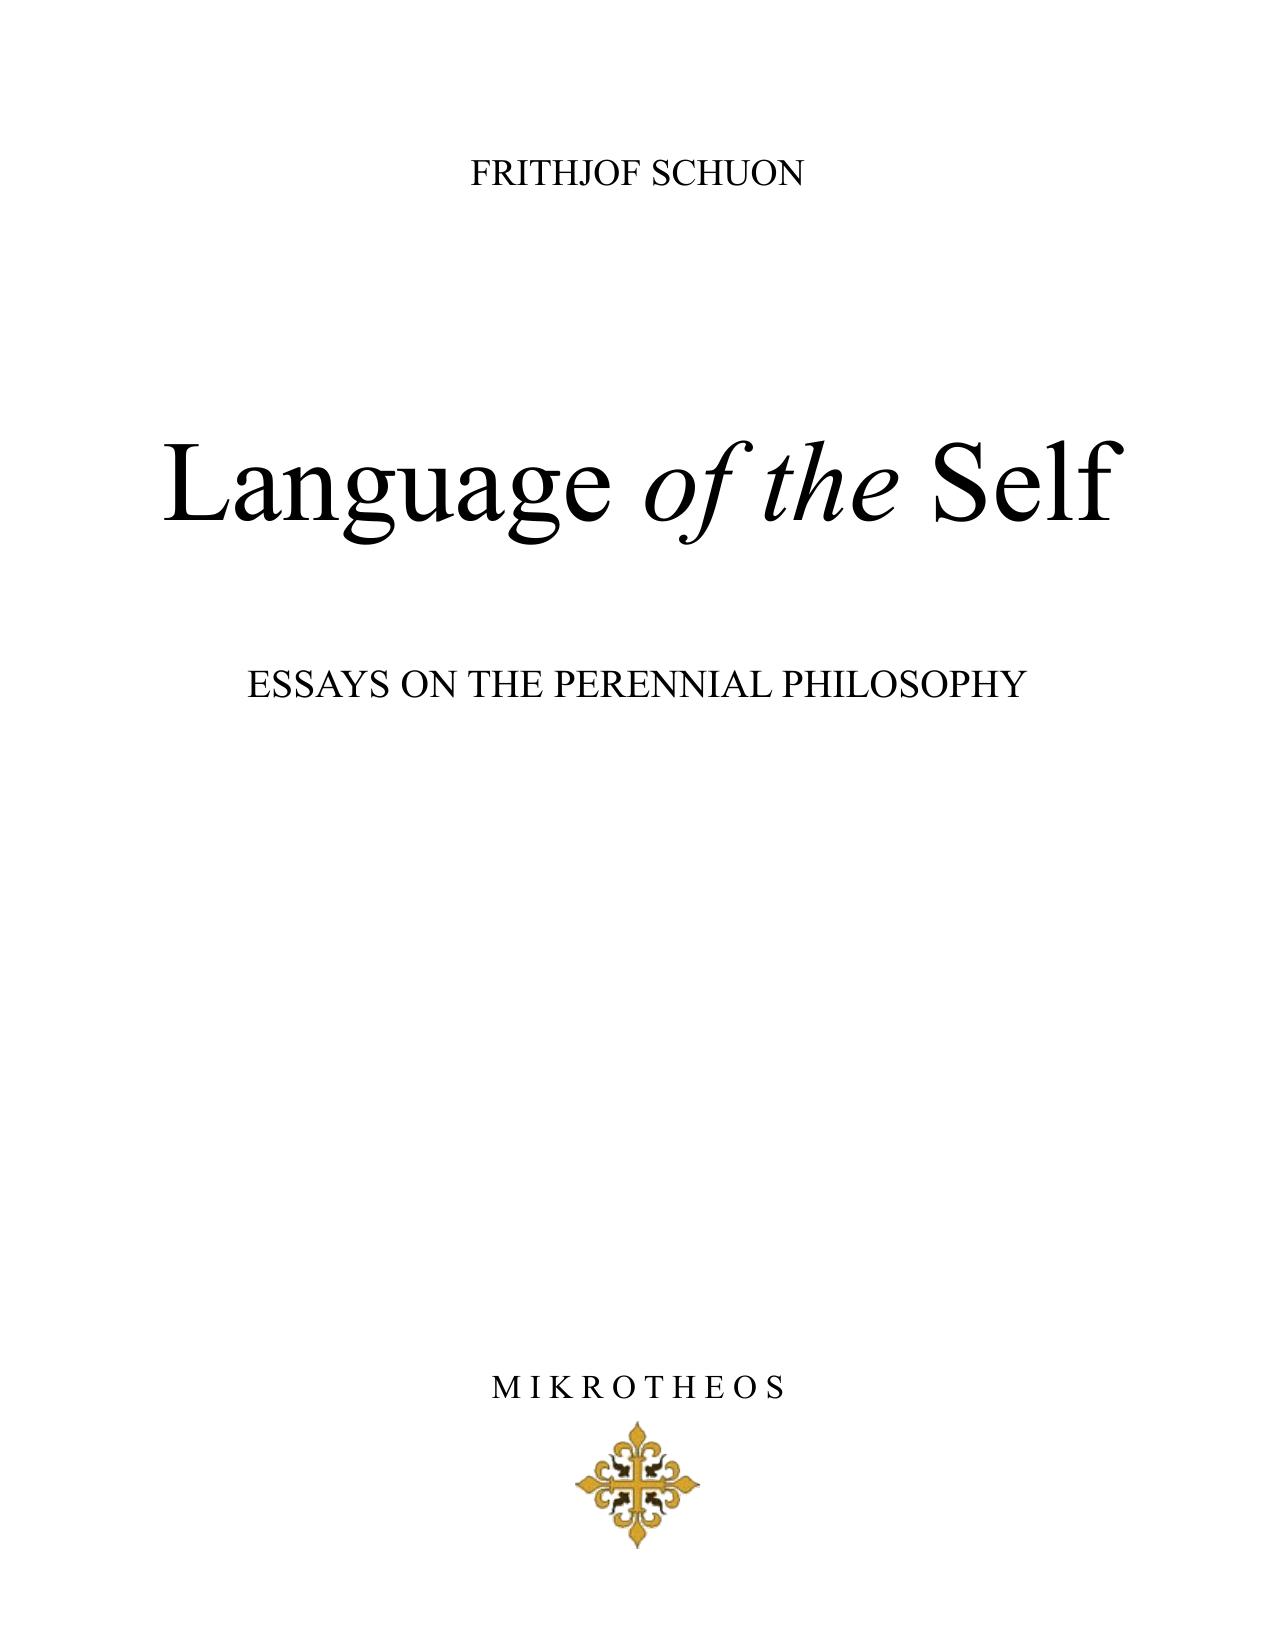 Language of the Self - Essays on the Perennial Philosophy by Frithjof Schuon